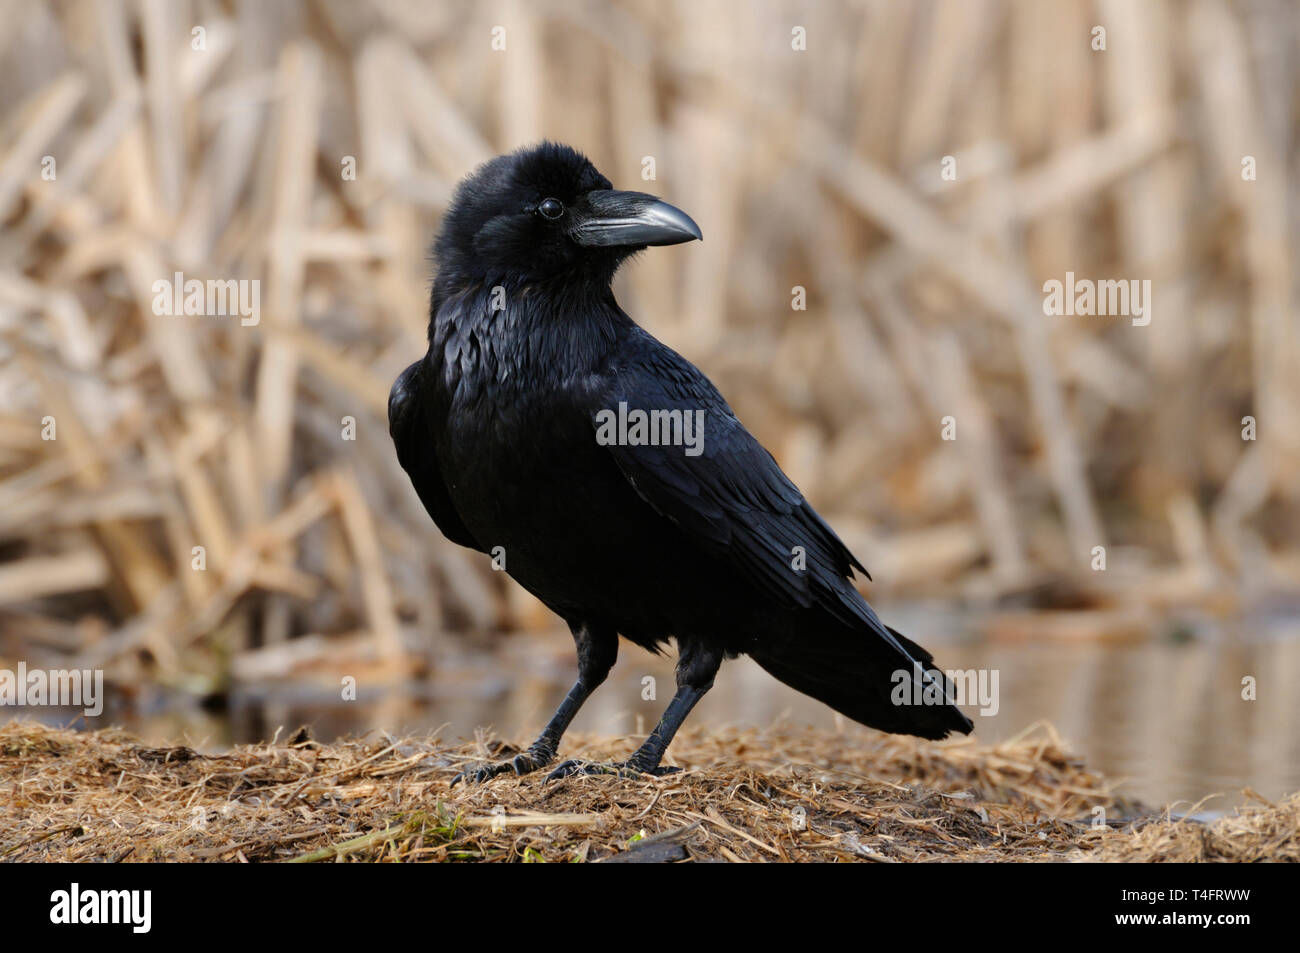 Common Raven / Kolkrabe ( Corvus corax ) perched on the ground, detailled close-up, black shining plumage, watching attentively, wildlife, Europe. Stock Photo